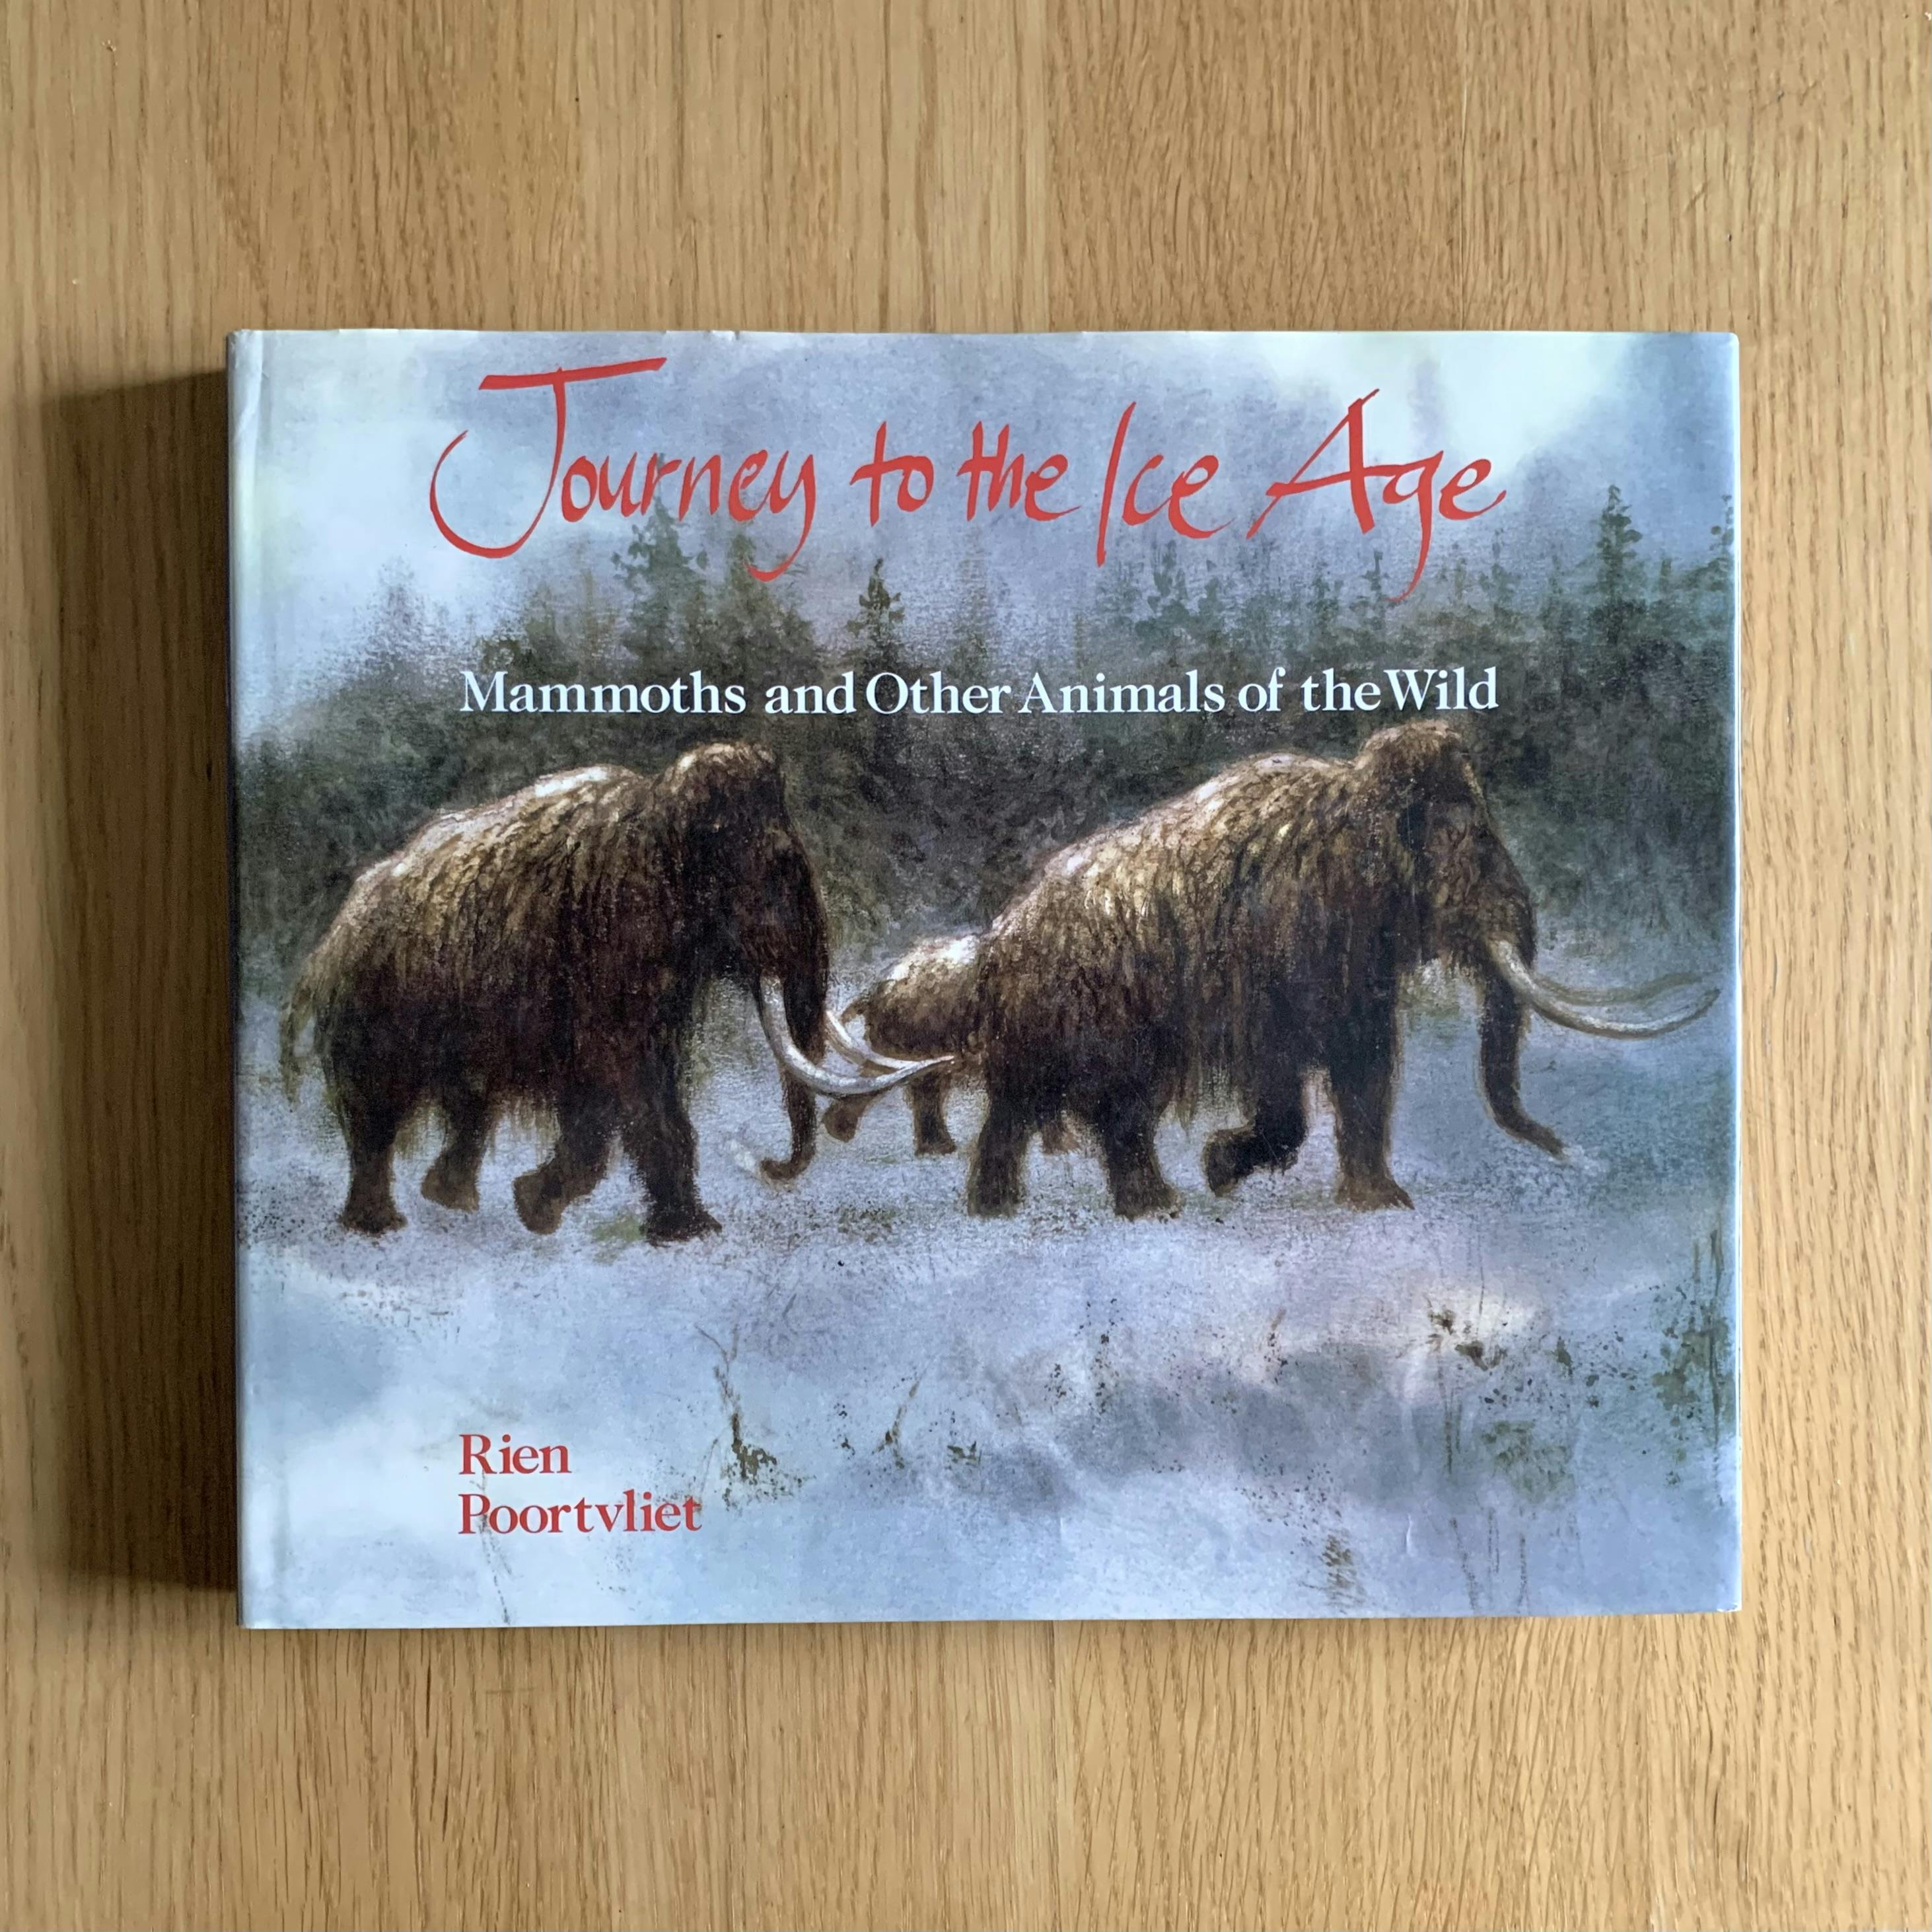 Cover of my copy of “Journey to the Ice Age” by Rien Poortvliet. The book rests on a wooden surface. The cover features a drawing of three mammoths walking in the snow in front of coniferous trees.